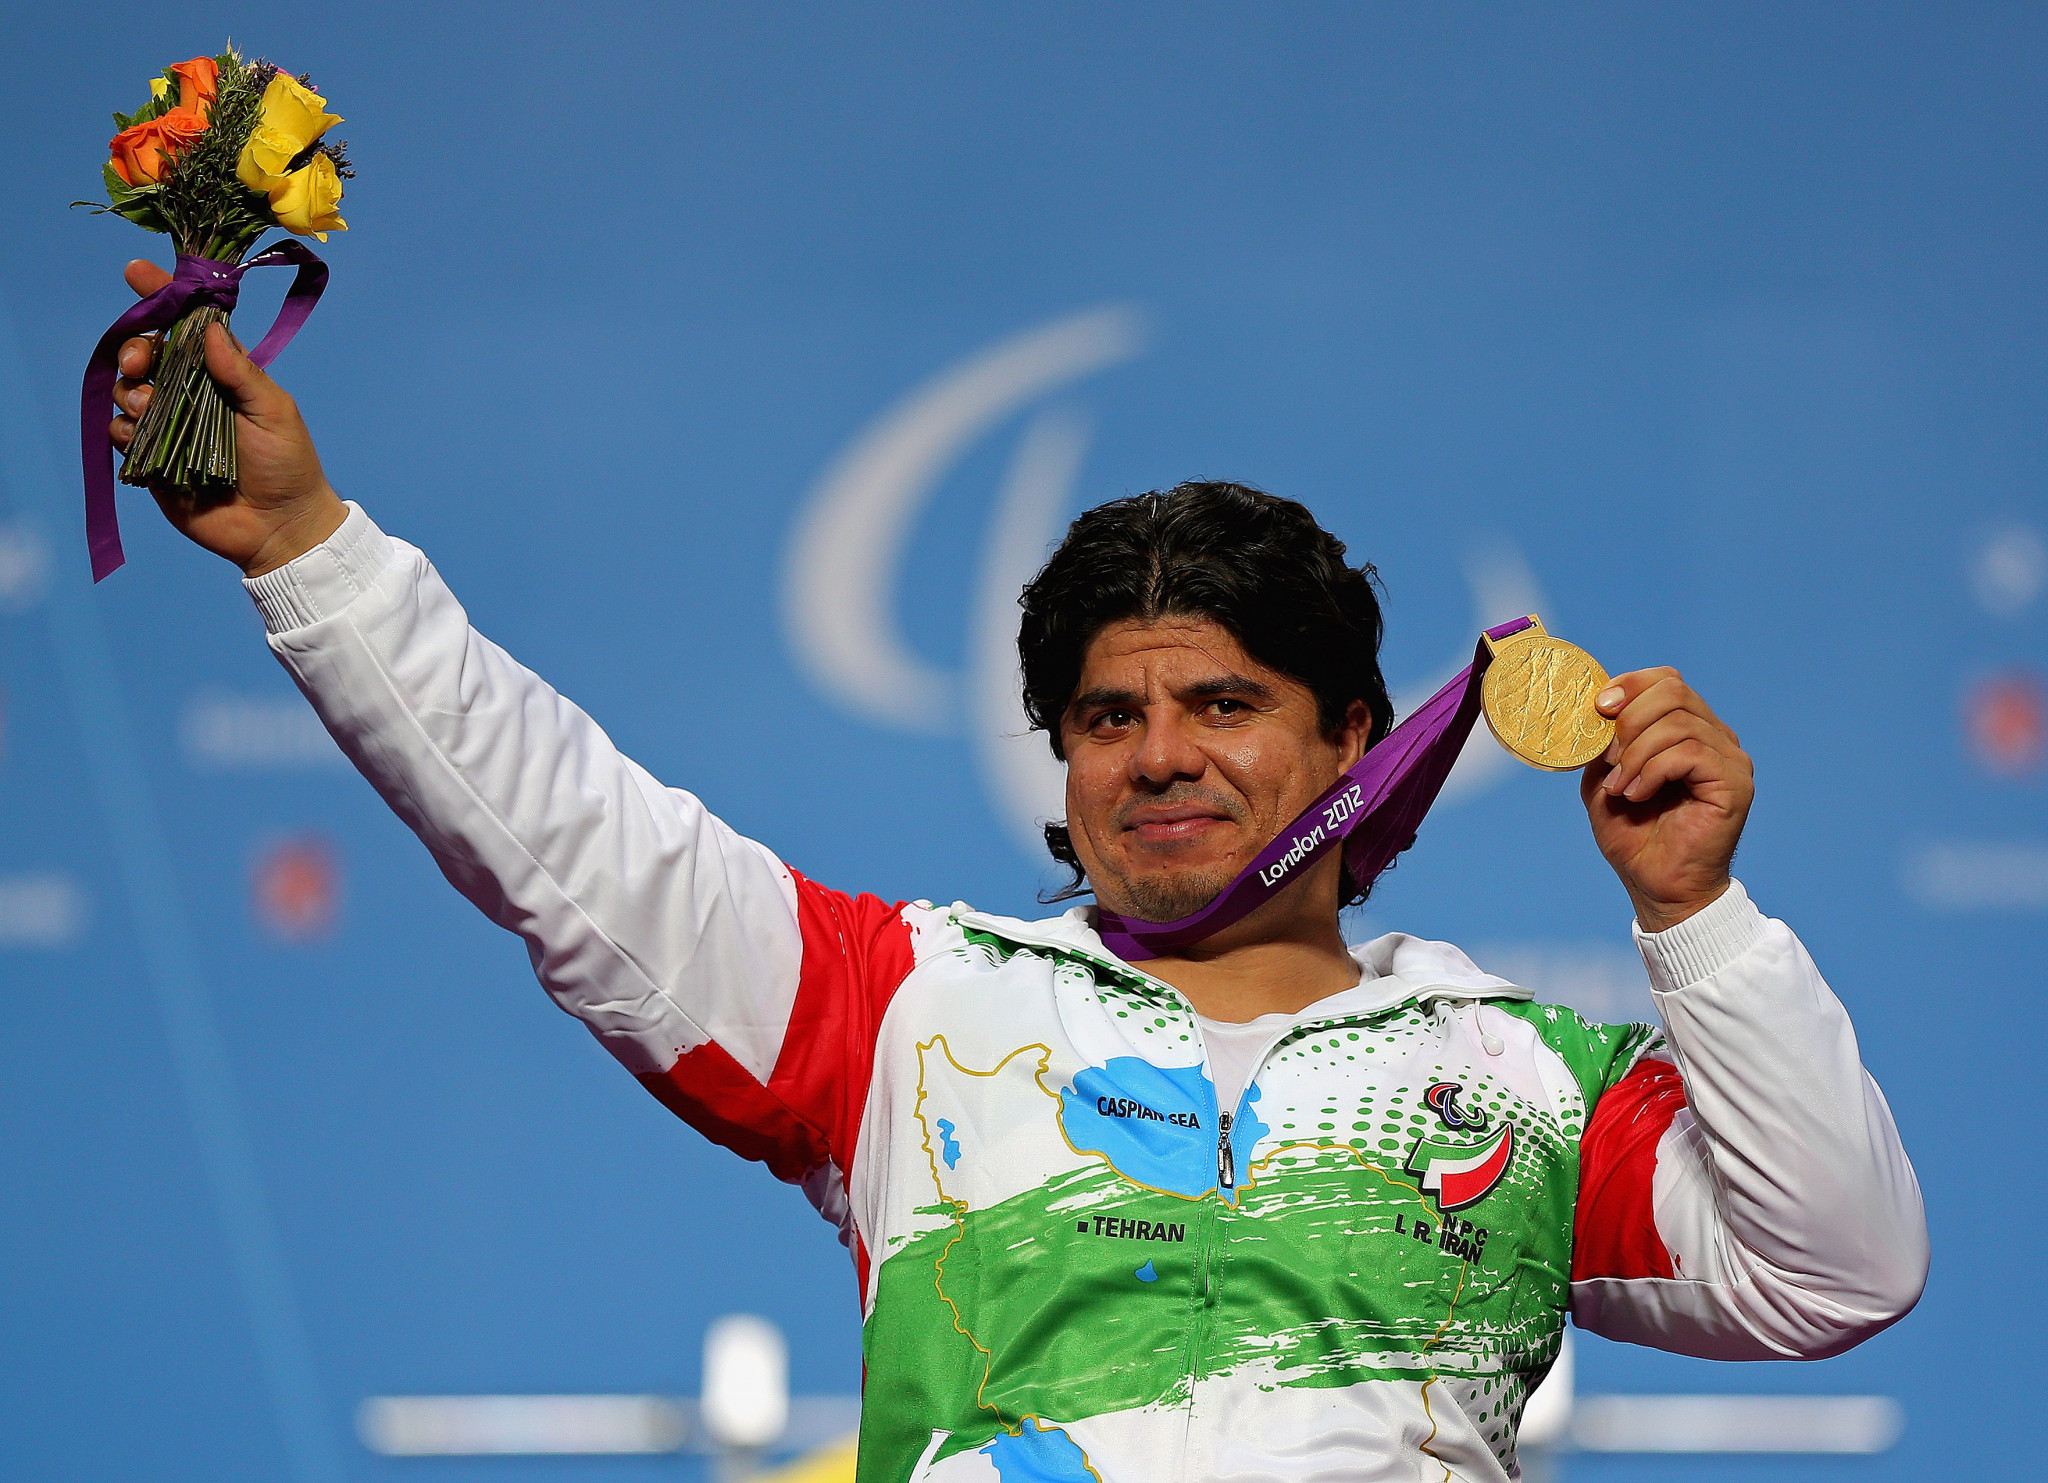 Majid Farzin is one of Iran's most successful Para powerlifters ©Getty Images